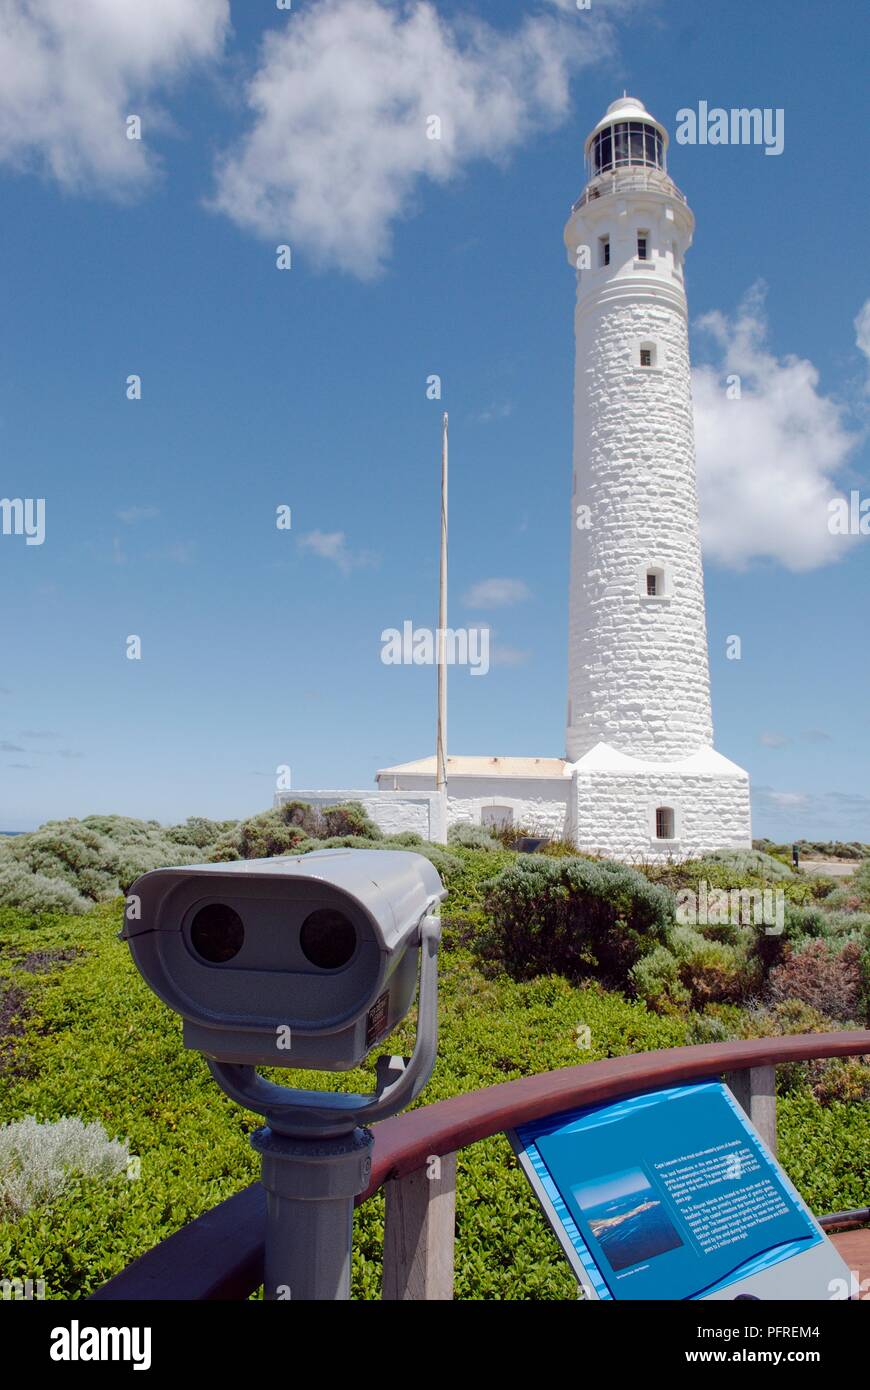 Australia, Western Australia, Cape Leeuwin, view of the lighthouse with coin-operated binoculars in foreground Stock Photo